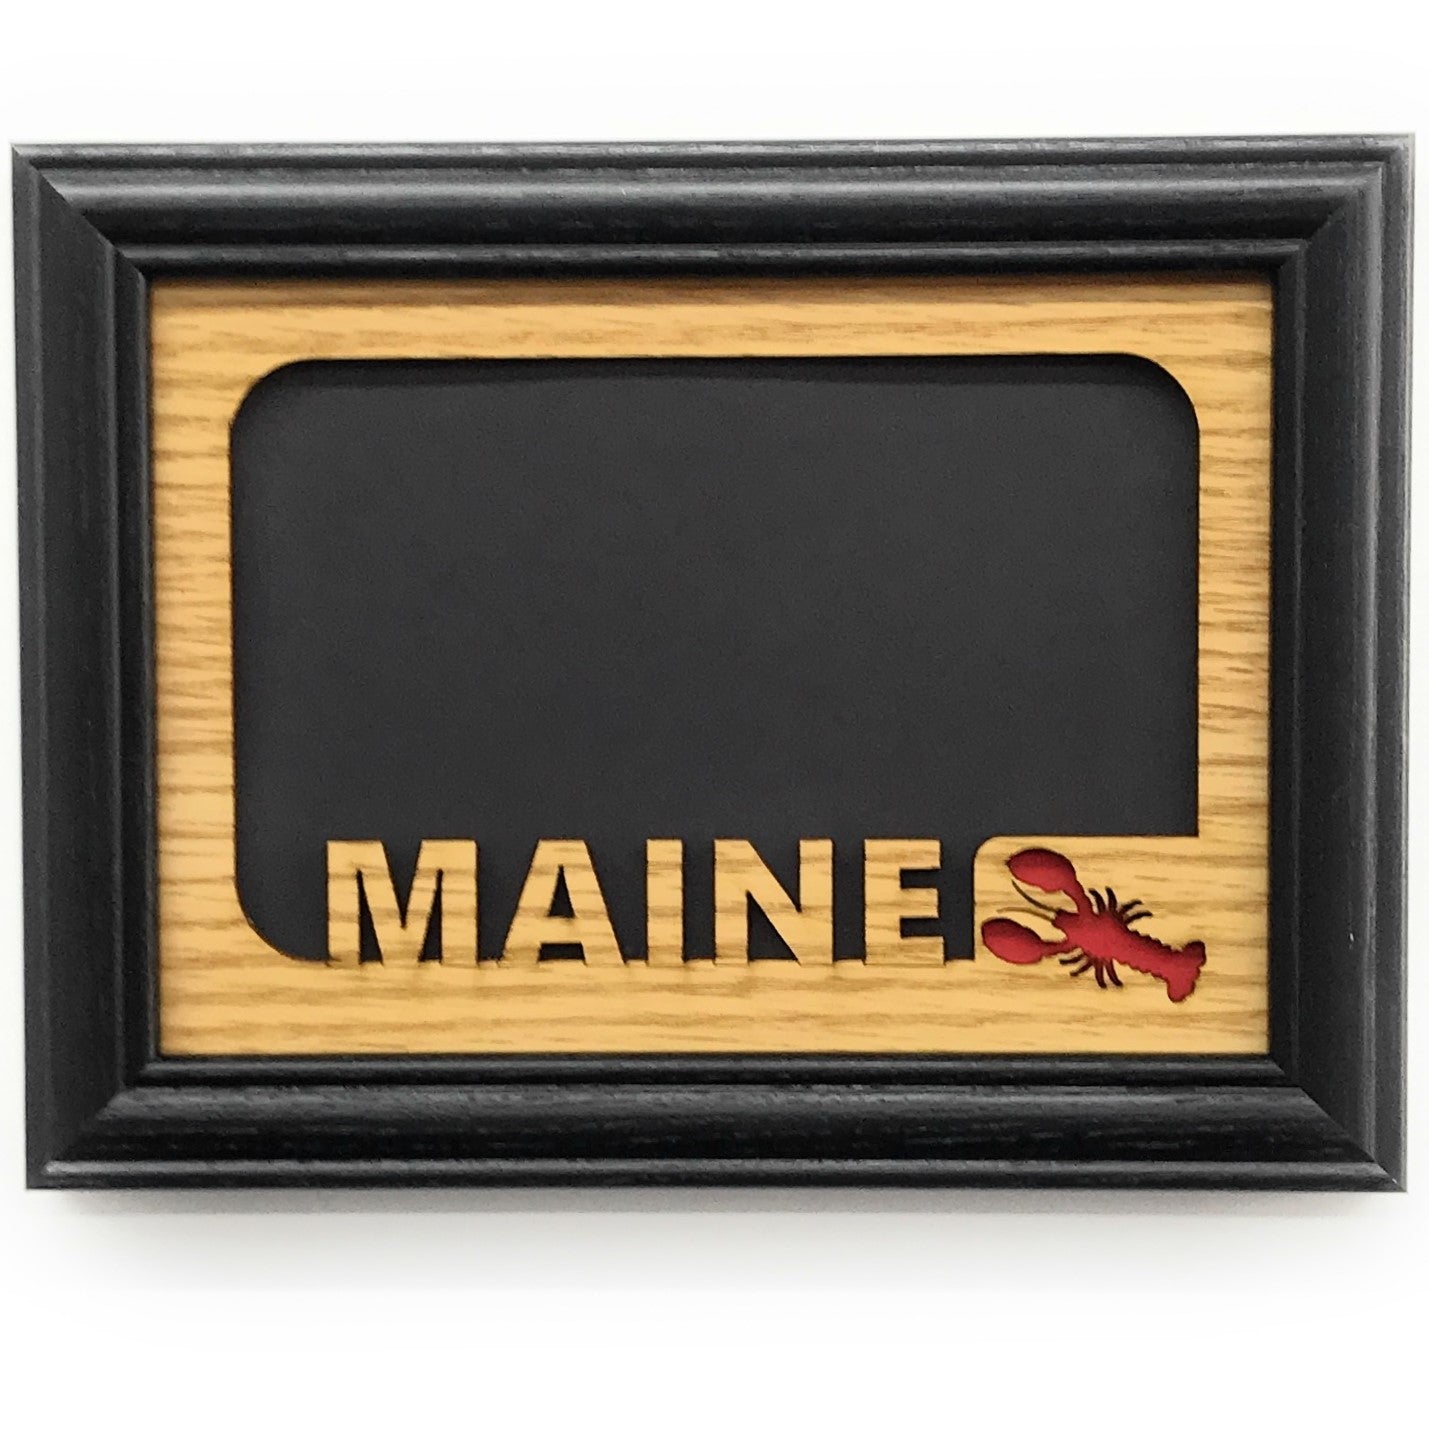 Maine Picture Frame - 5x7 Frame Hold 4x6 Photo